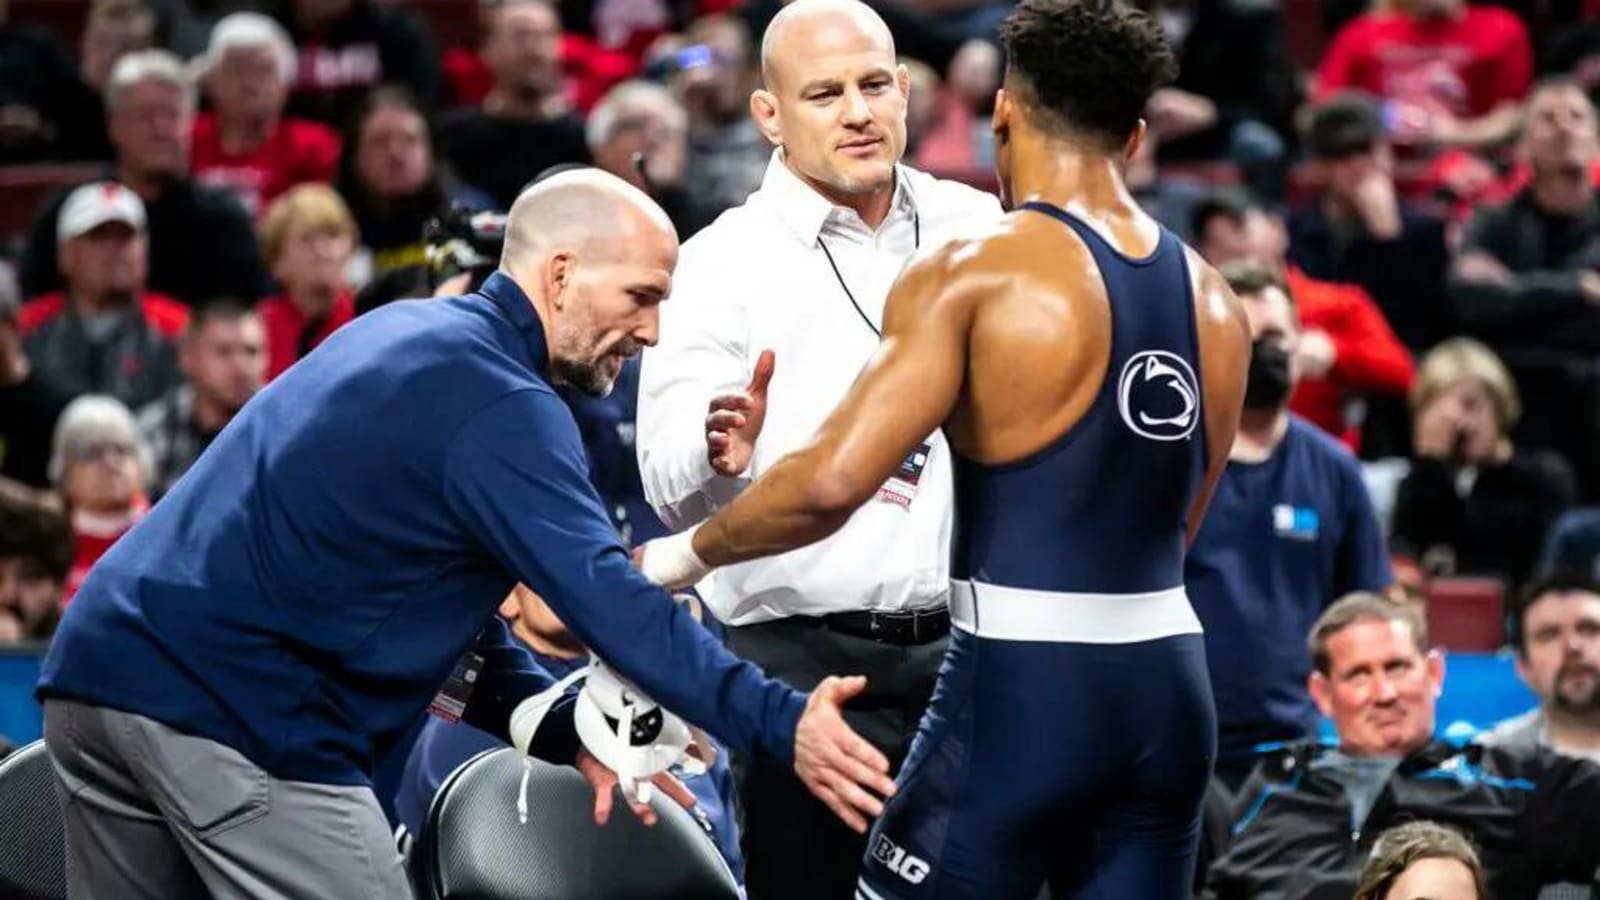 Penn State Wrestling: Top 15 Nittany Lions of All-Time